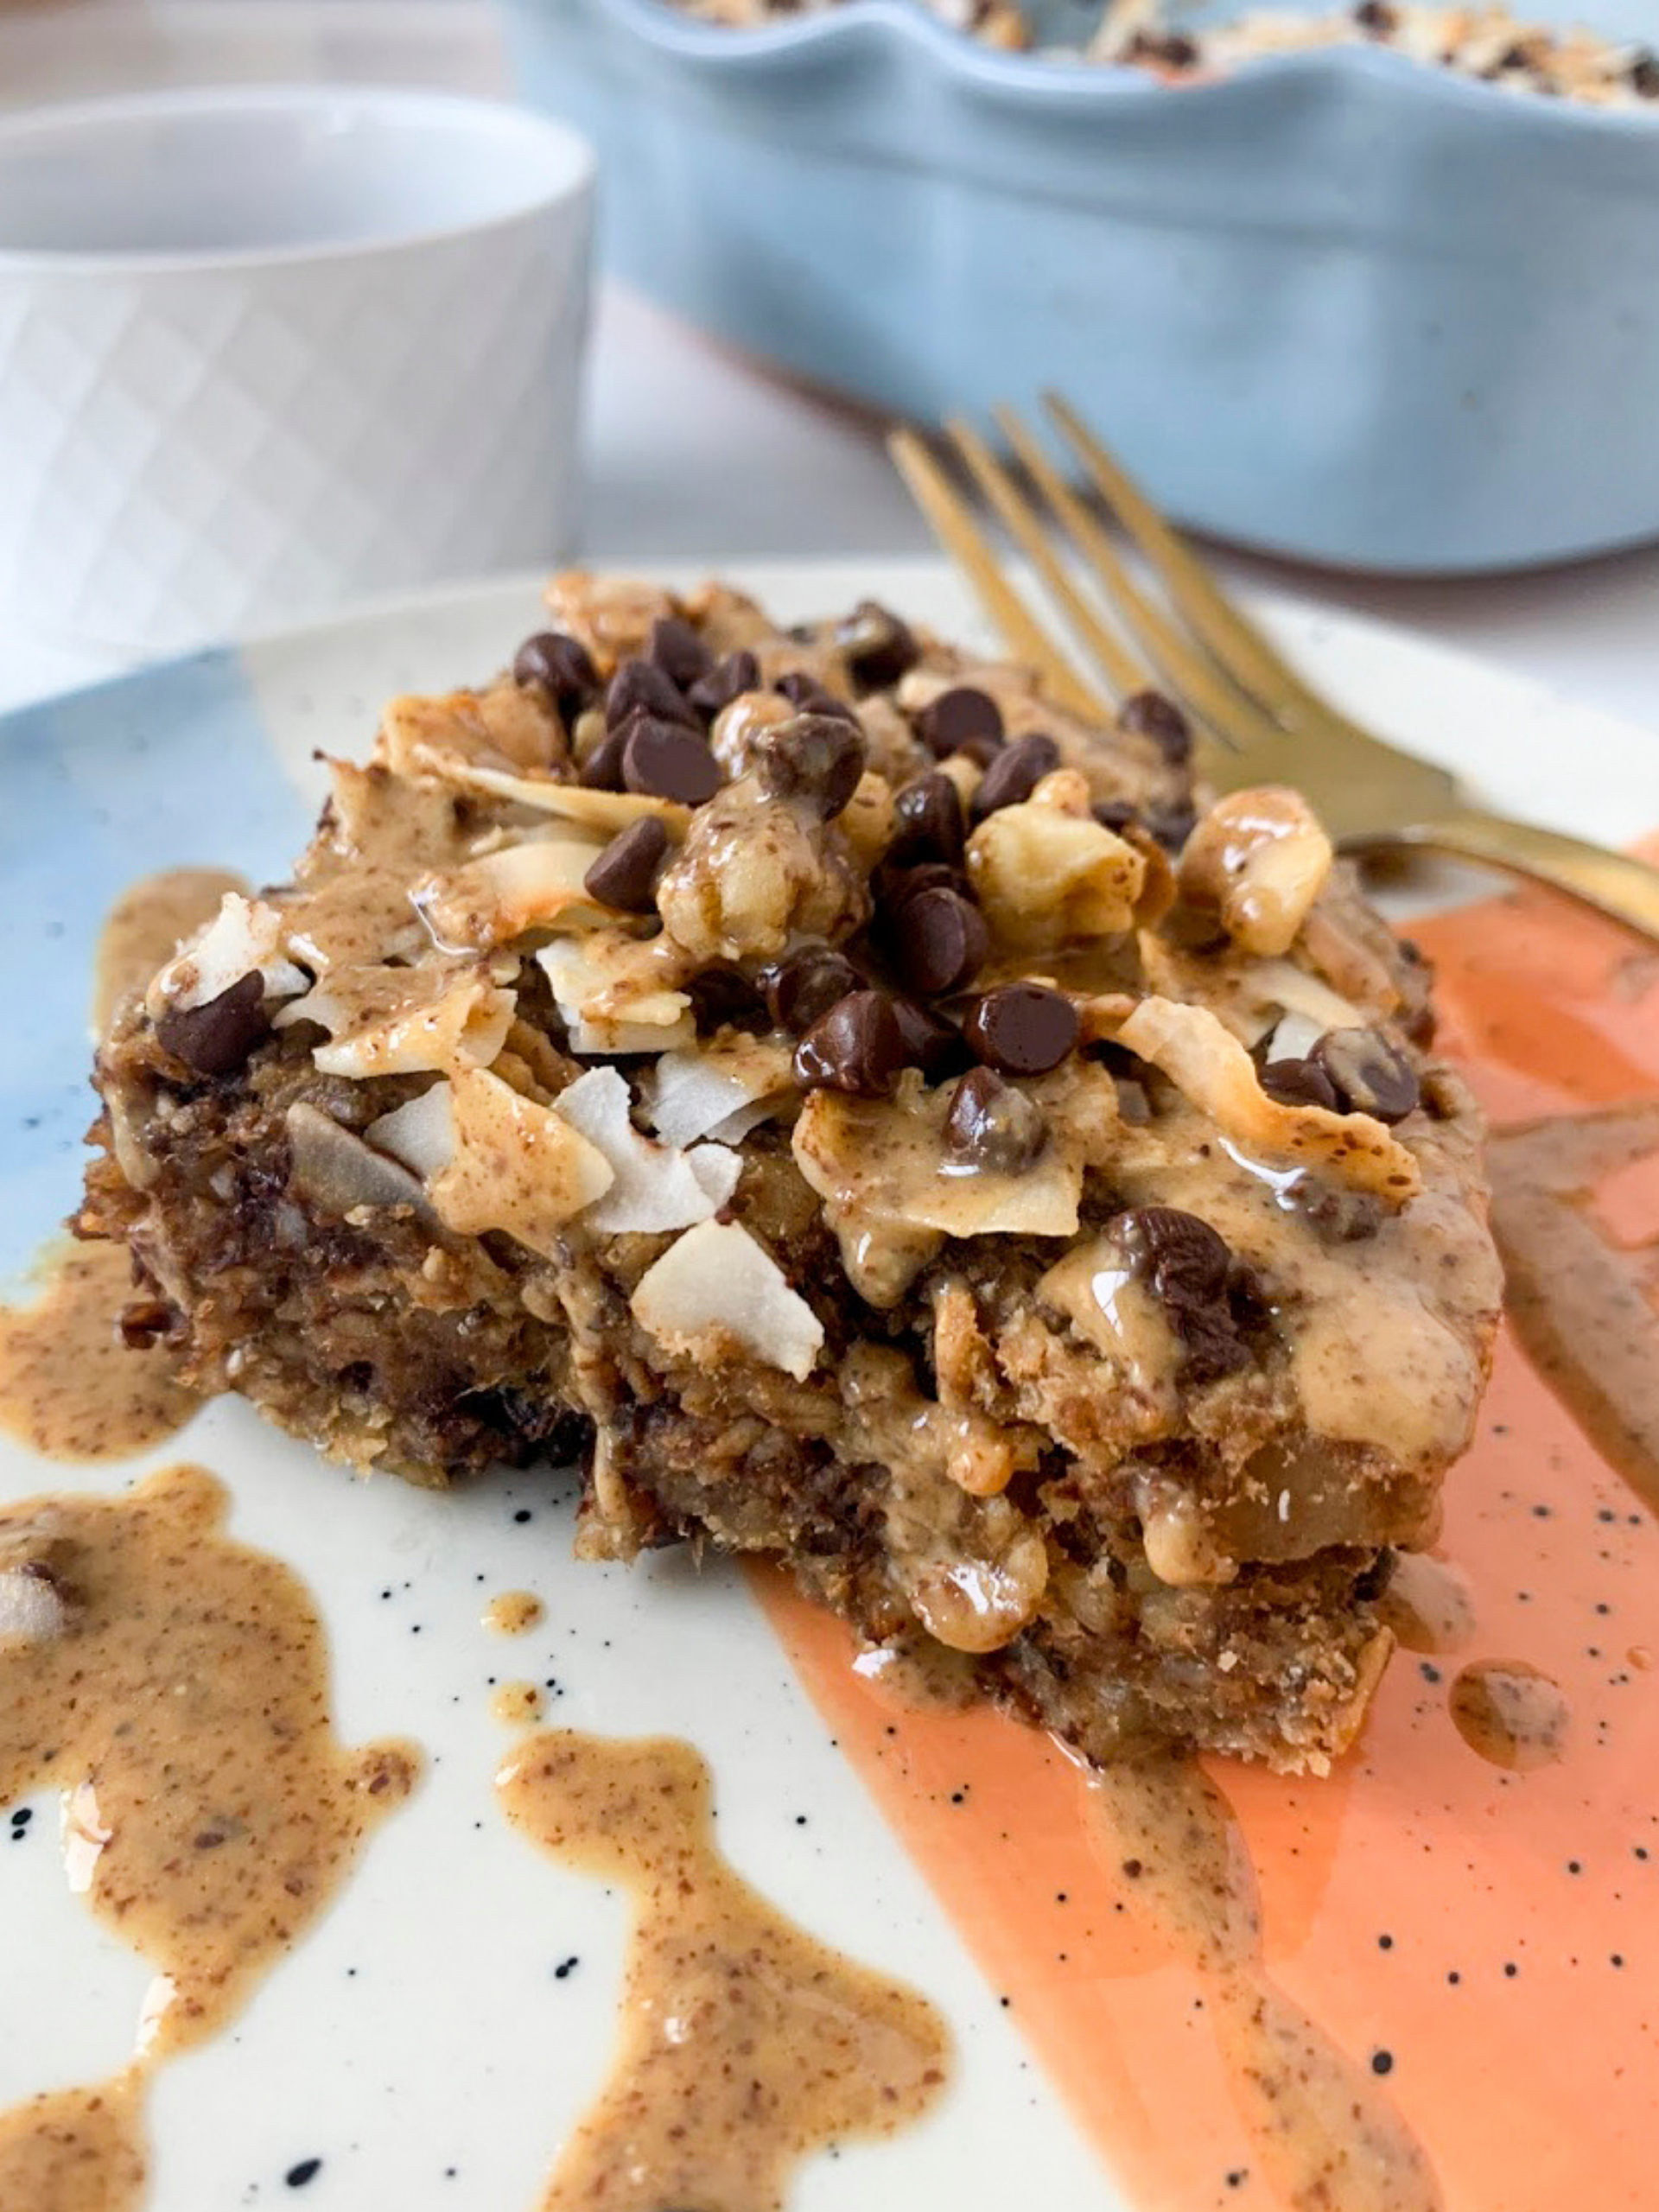 baked oatmeal with chocolate chips, coconut flakes, and almond butter on a plate with a fork